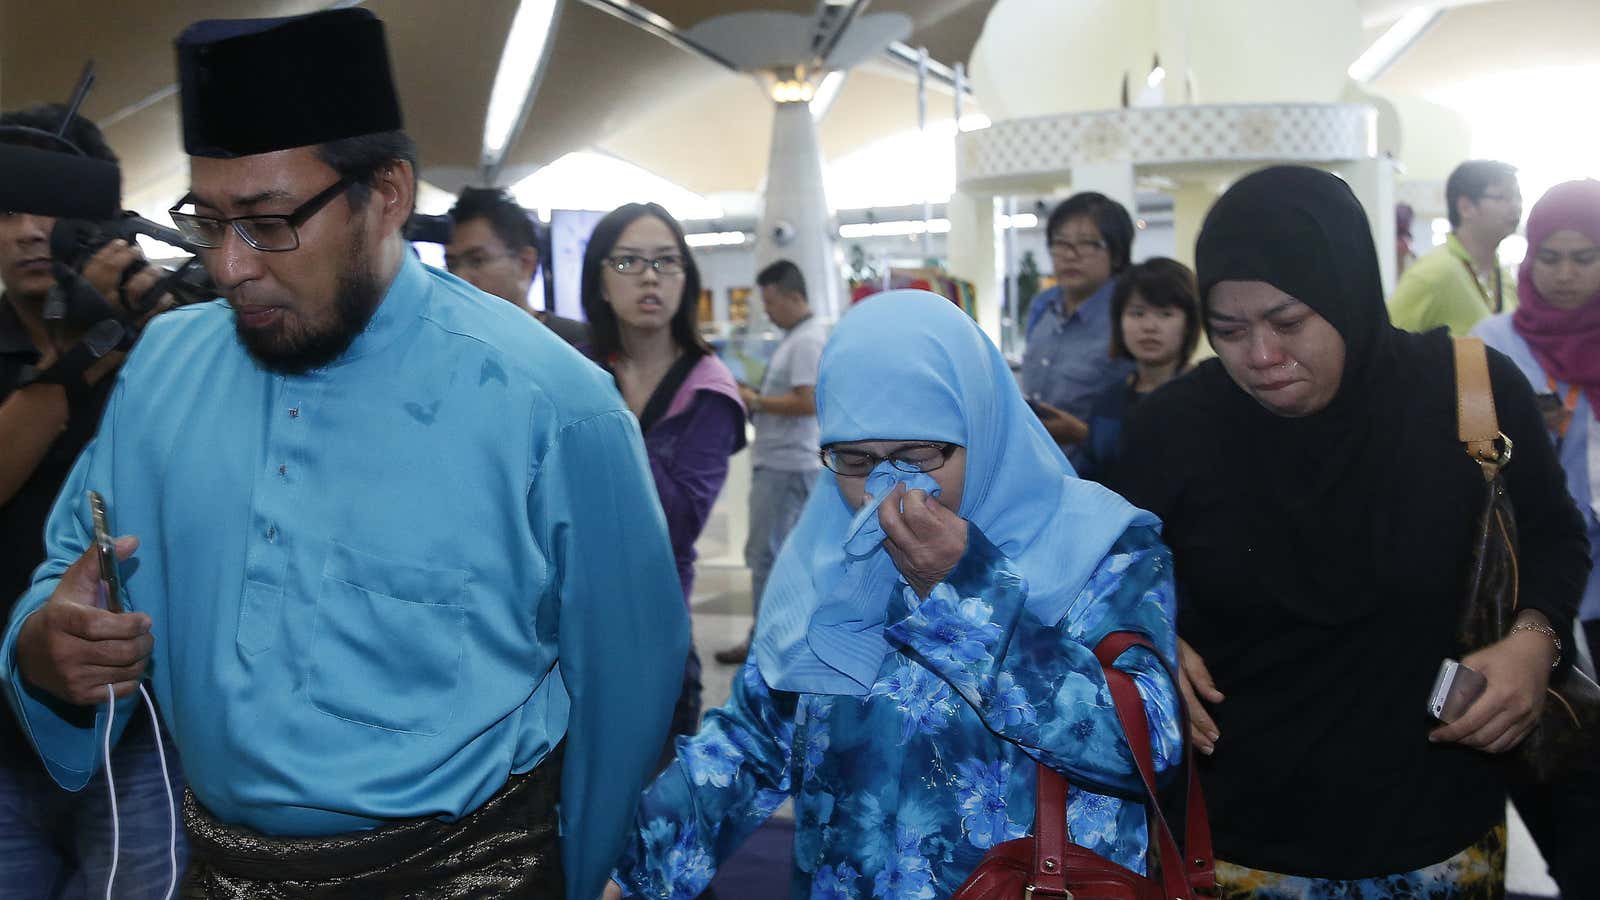 Relatives of passengers aboard the downed flight from Amsterdam arrive in Kuala Lumpur.